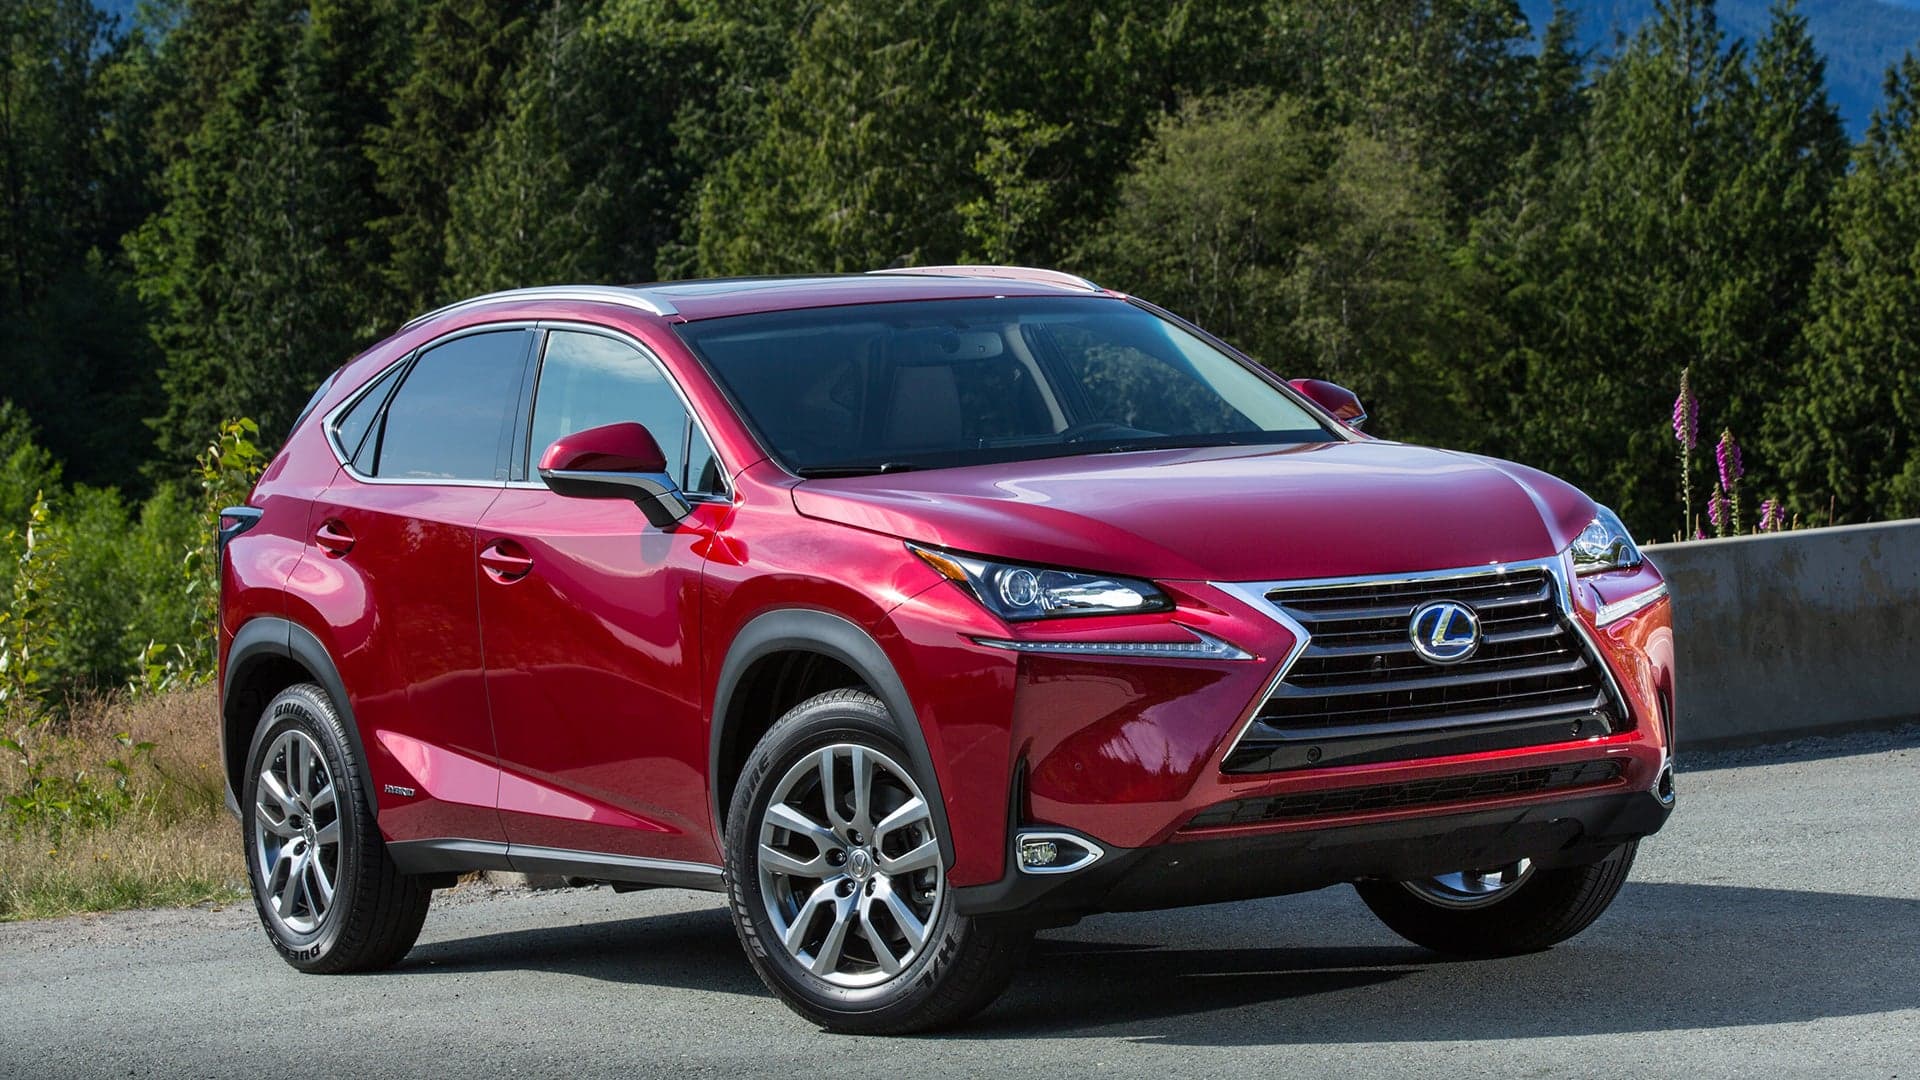 The Extra Cost for a Hybrid Lexus Crossover is Much Lower for 2018